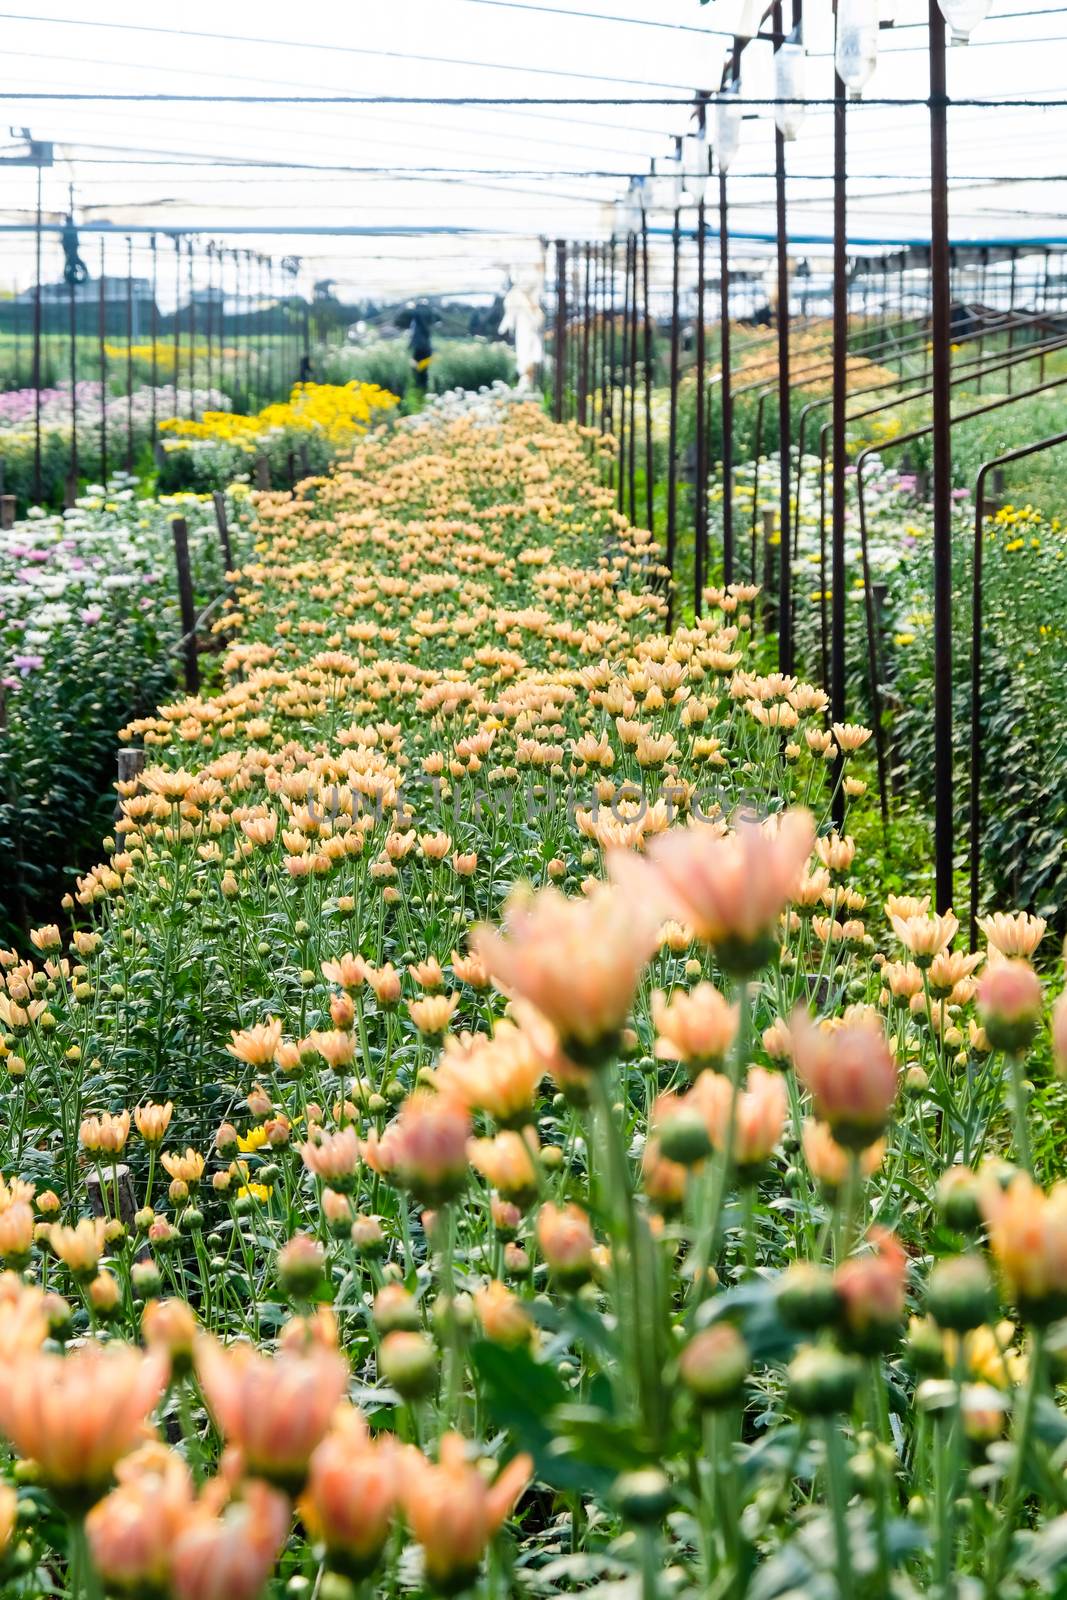 View of Gerbera cultivated flower beds and chrysanthemum flowers are being cultivated on a farm in Saraburi, Thailand